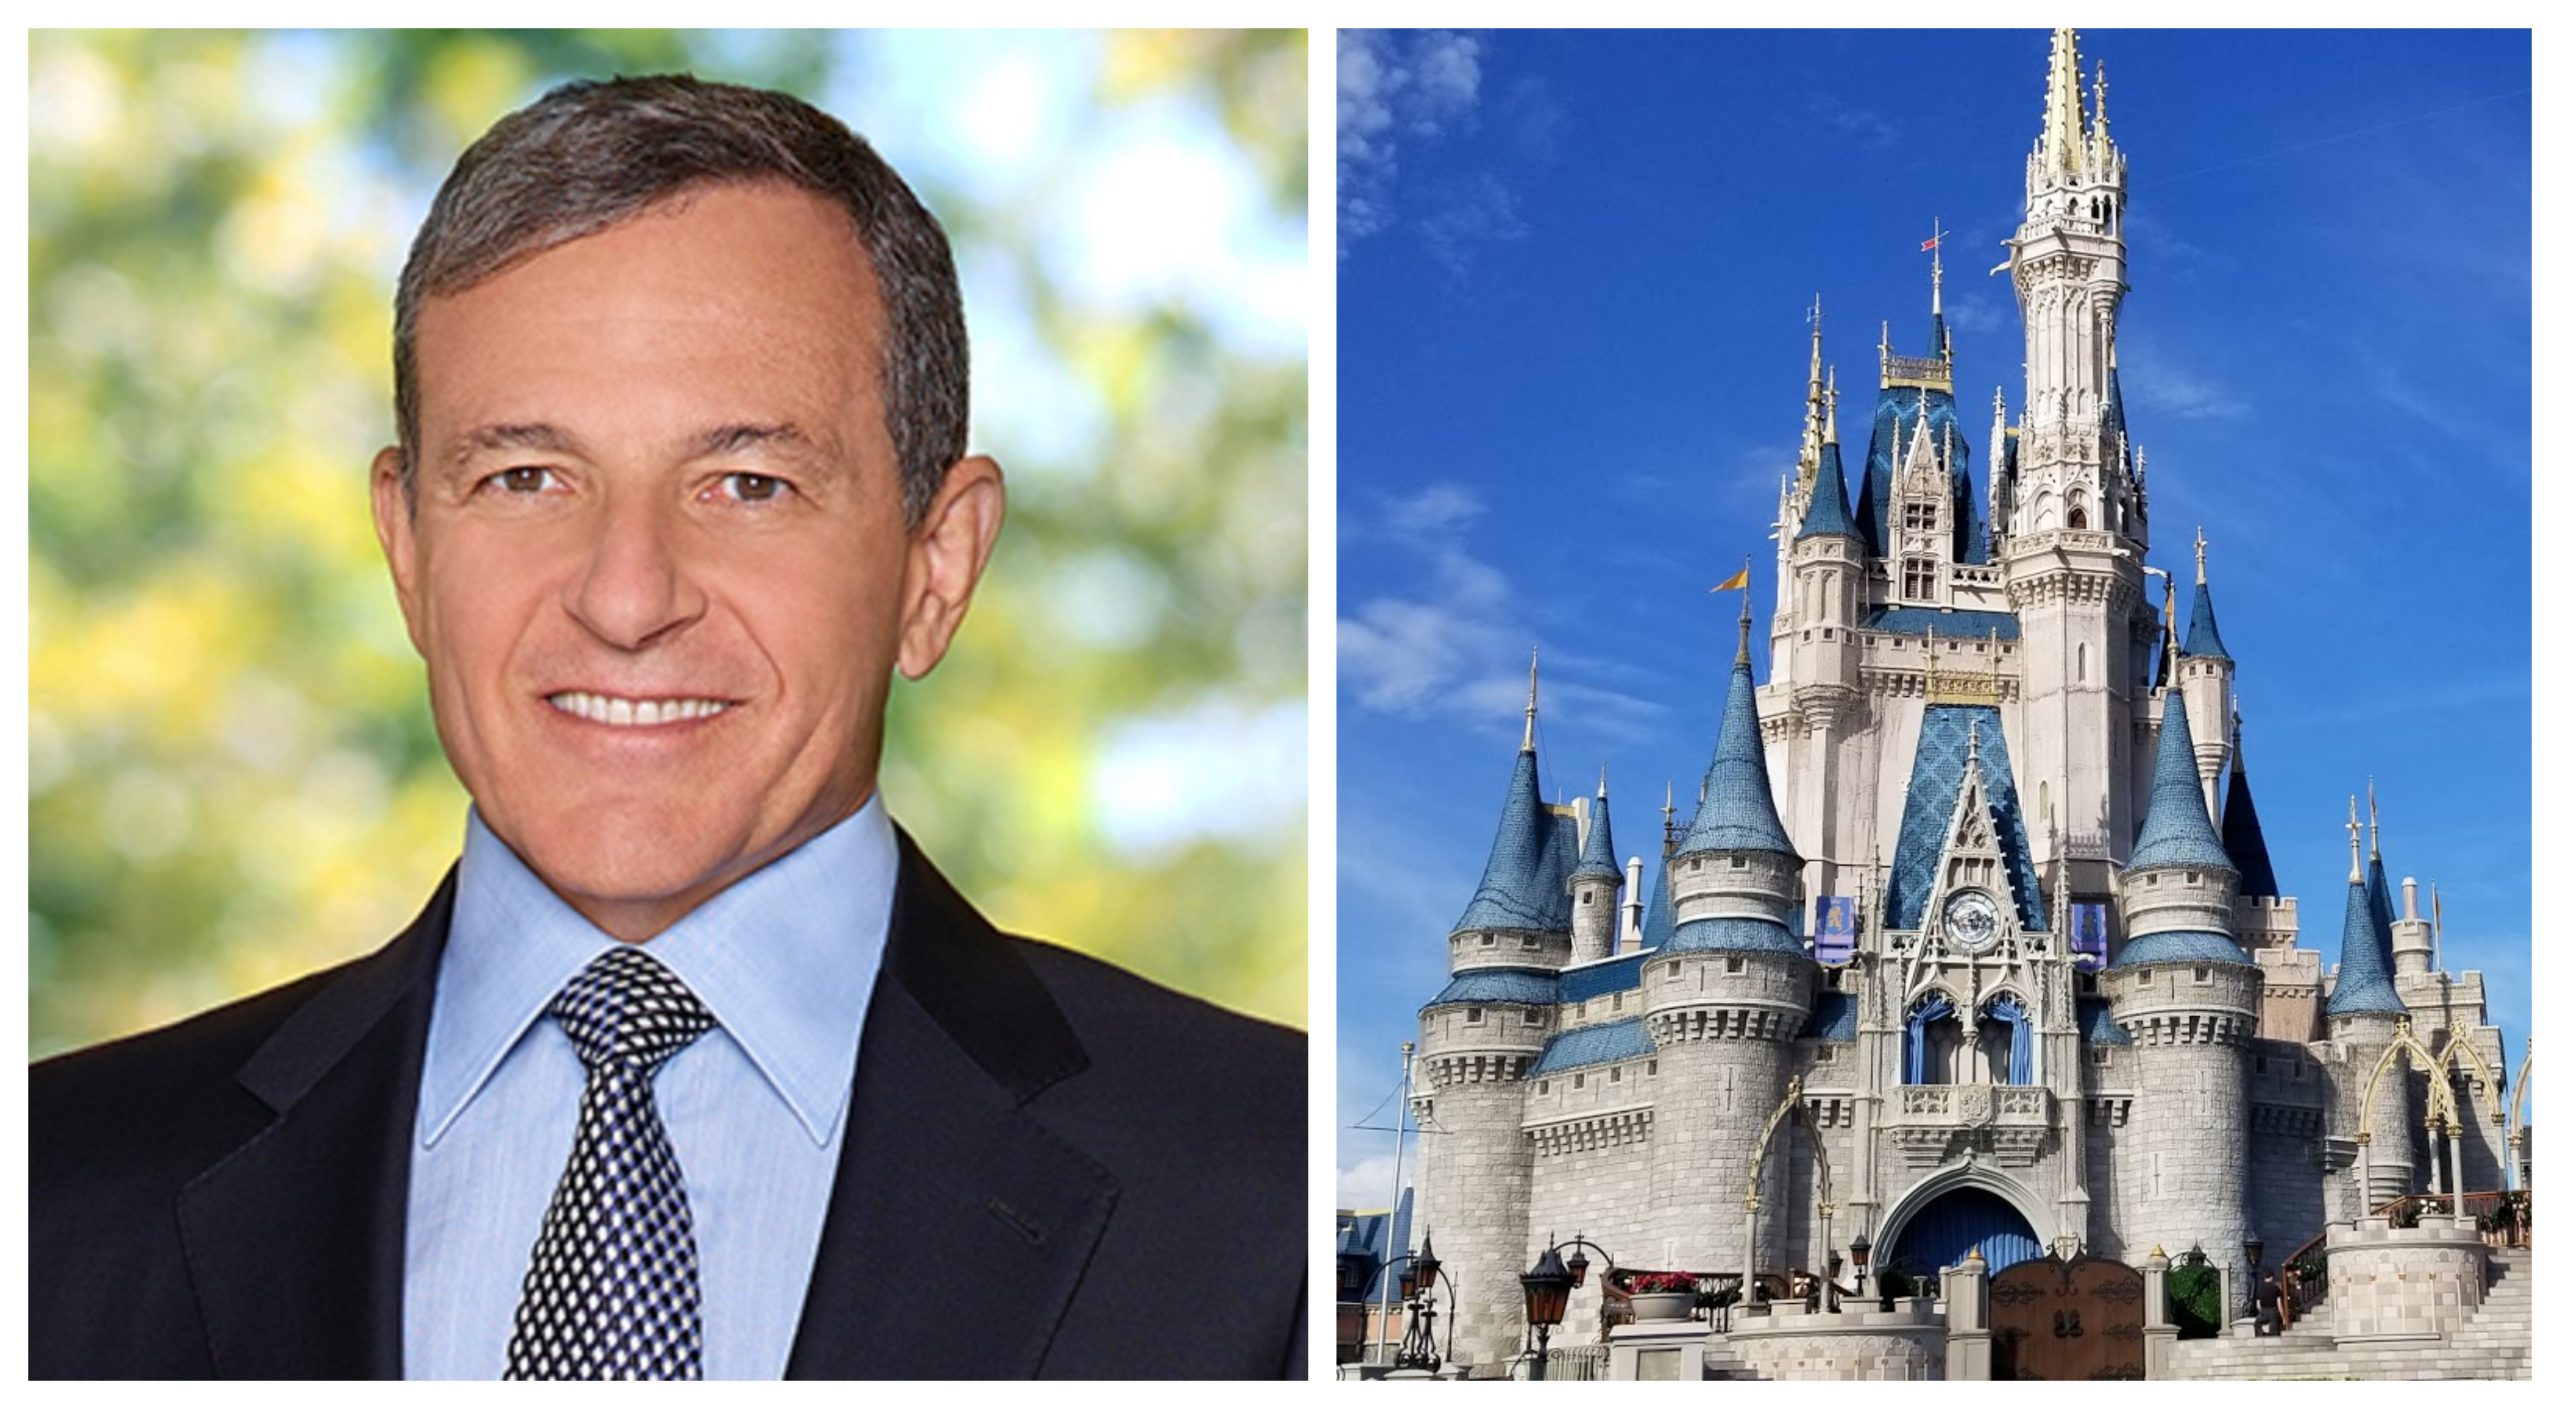 Bob Iger returning to head up Disney again during the current pandemic